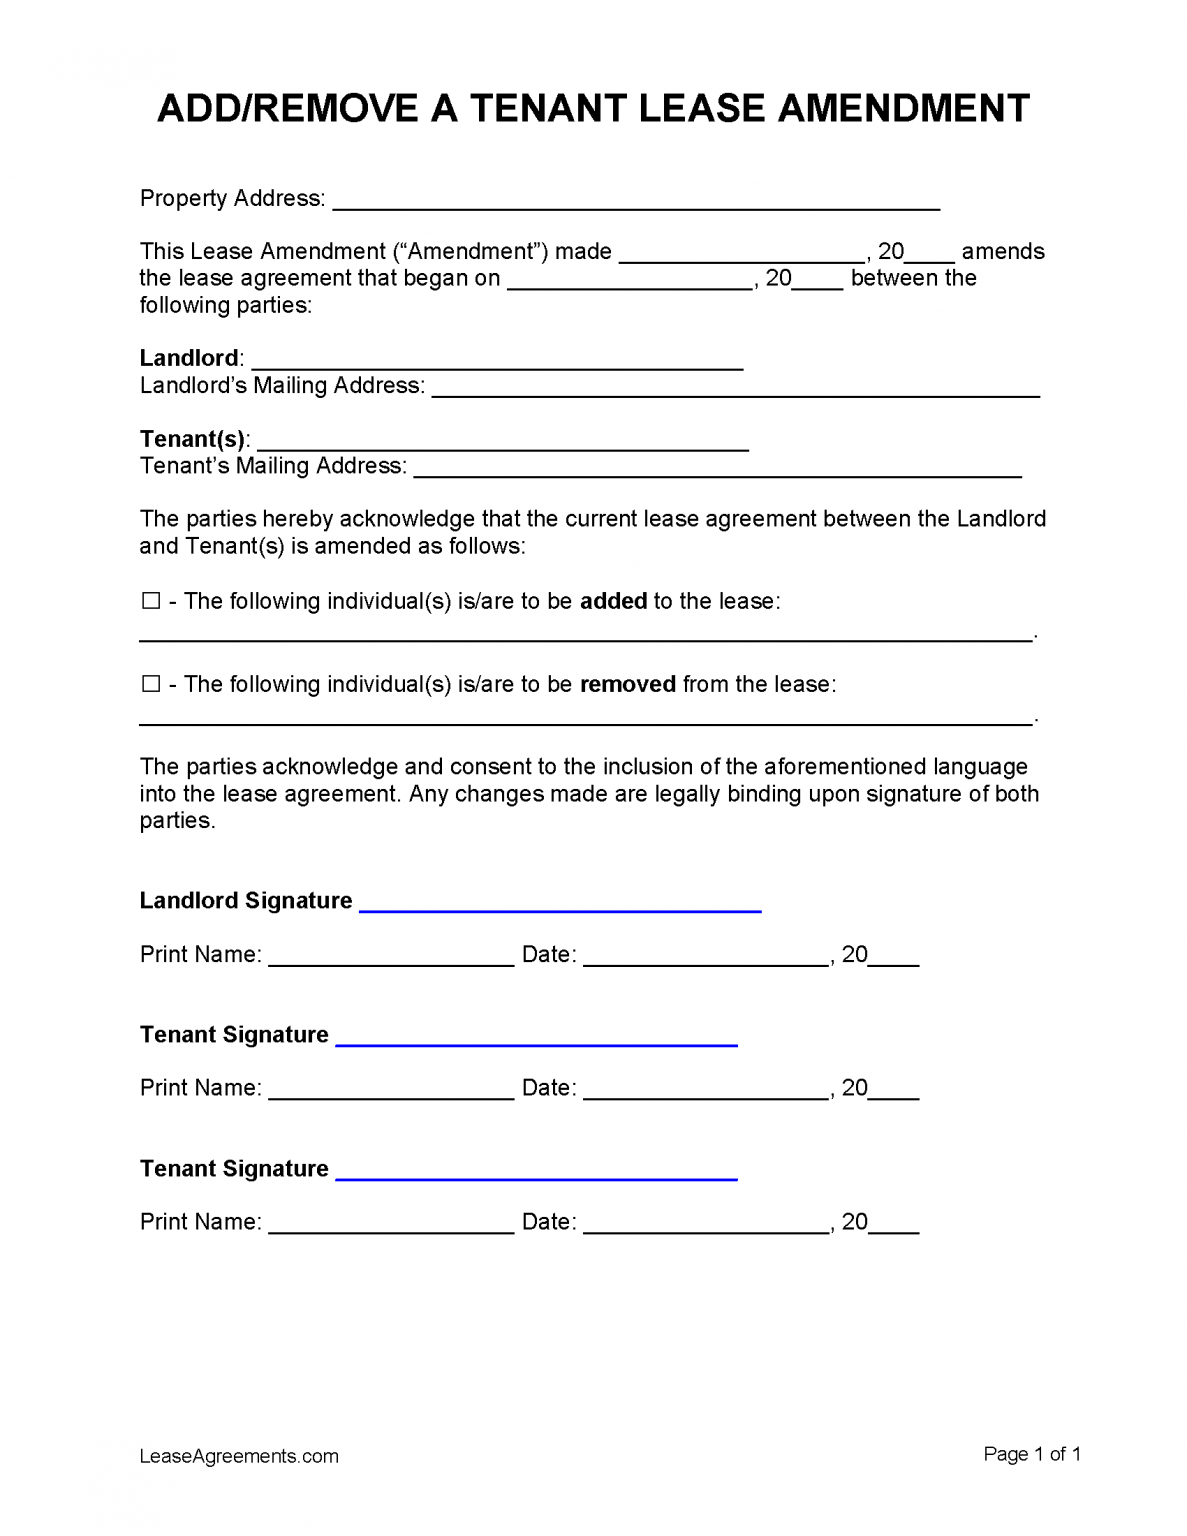 Free Adding/Removing a Tenant to a Lease Addendum Template PDF